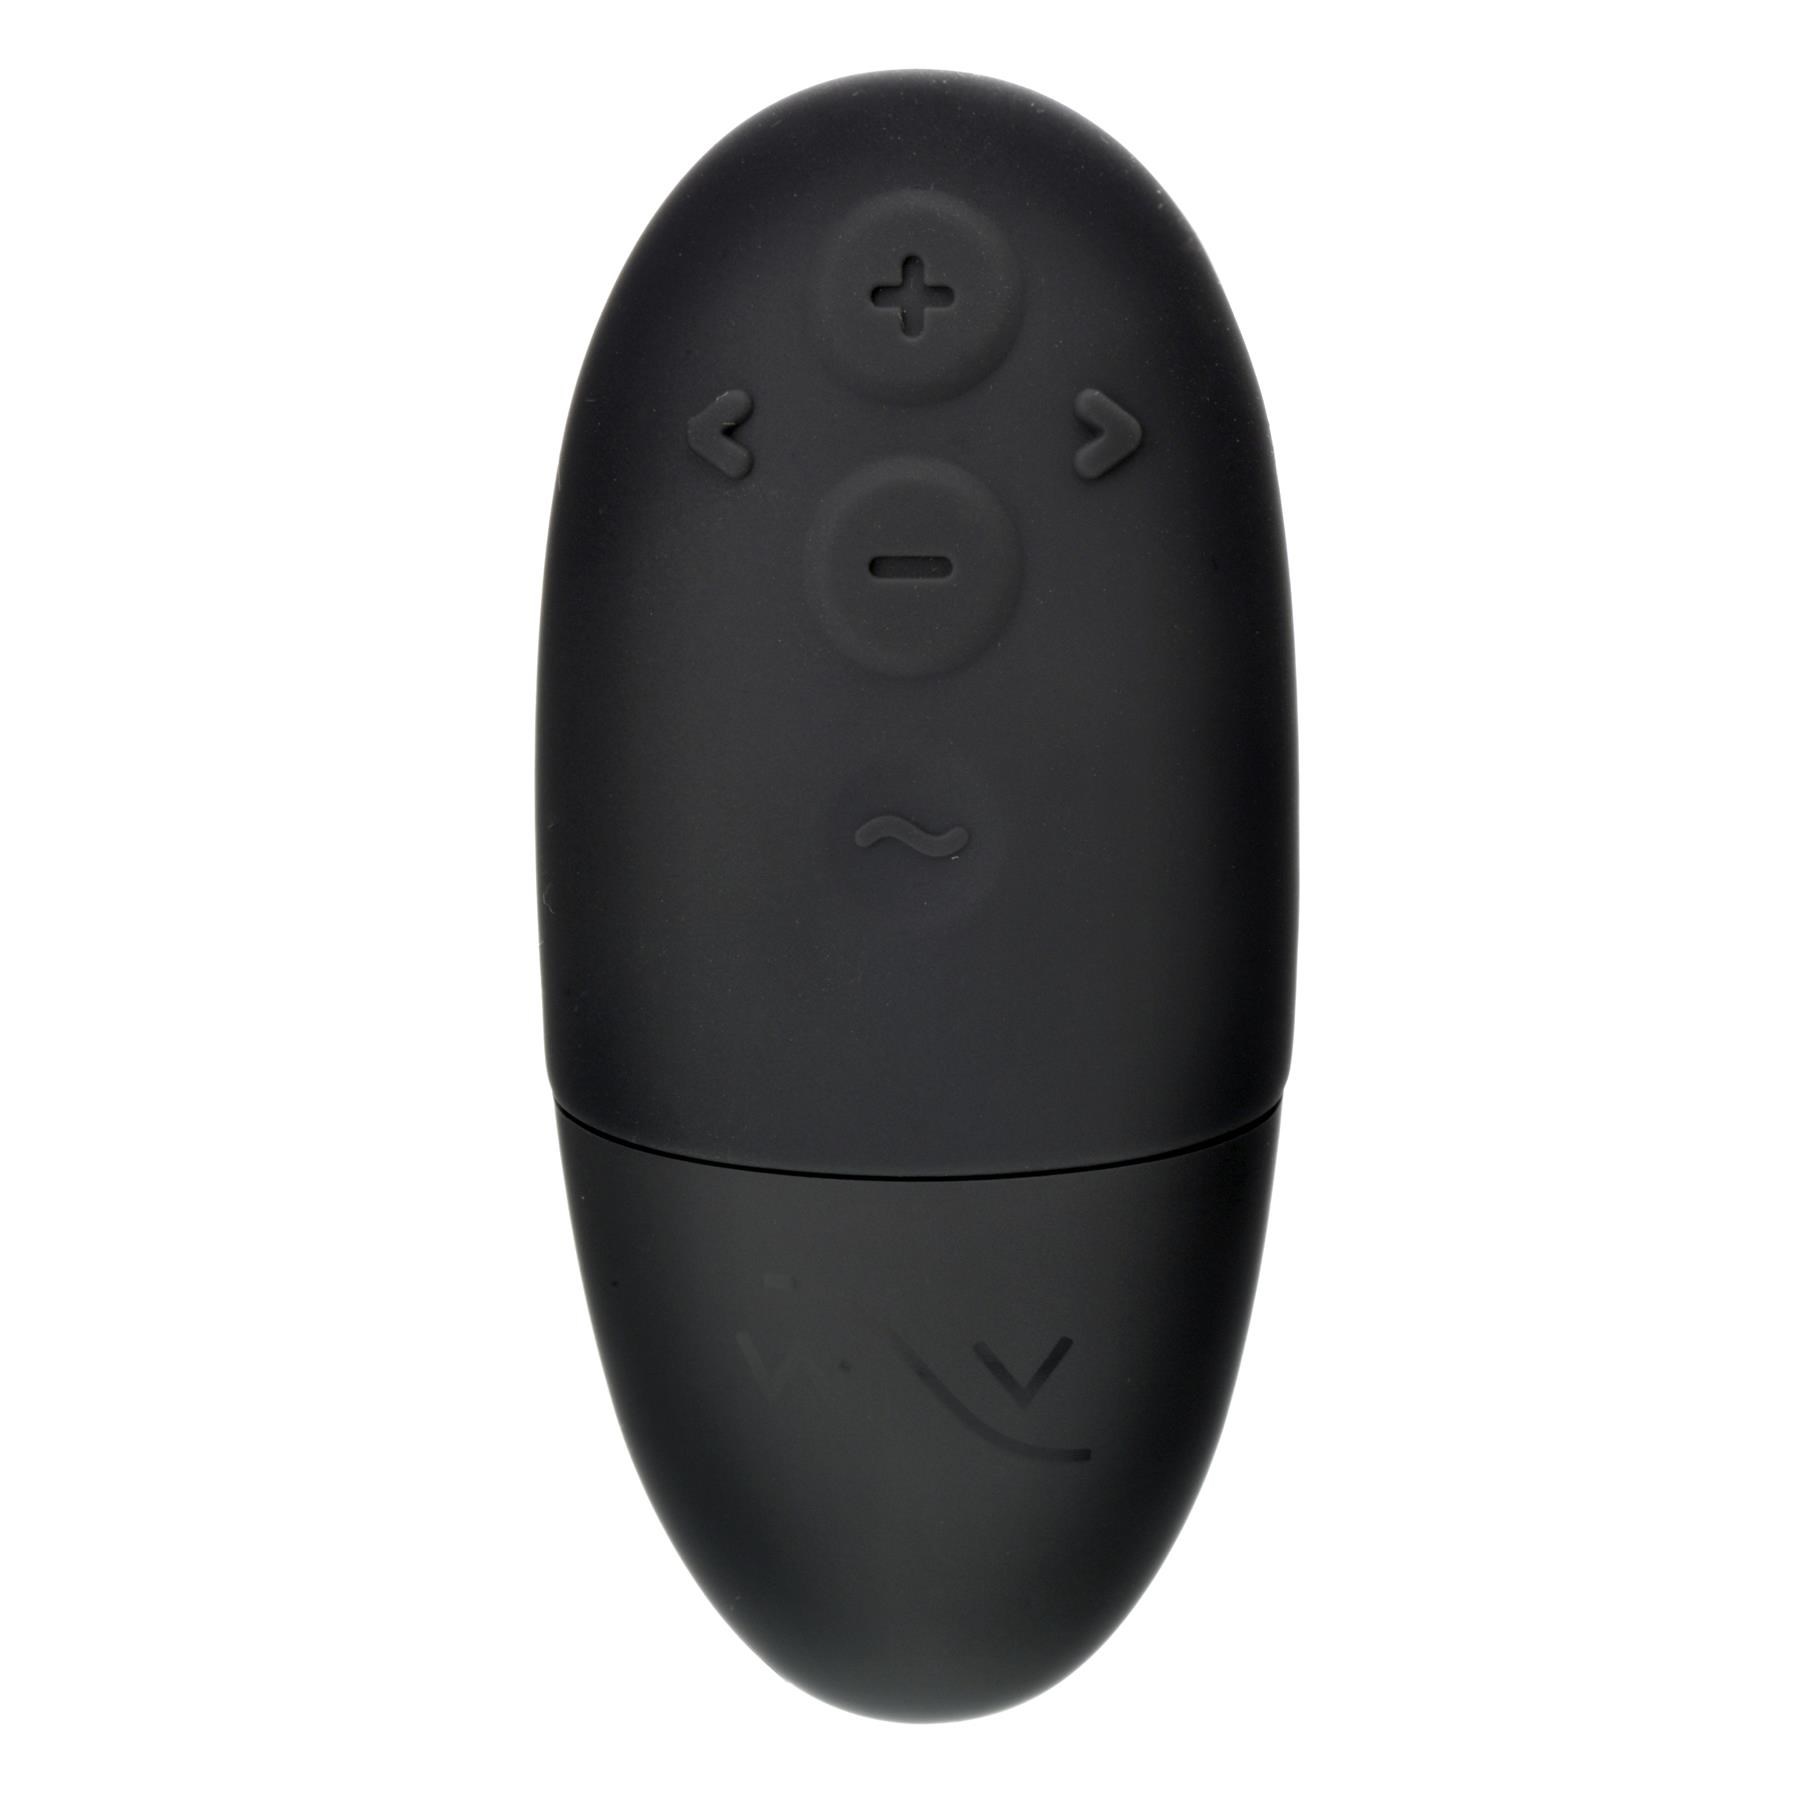 Arcwave + We-Vibe Double The Fun Couples Kit - We-Vibe Sync 2 Remote Control